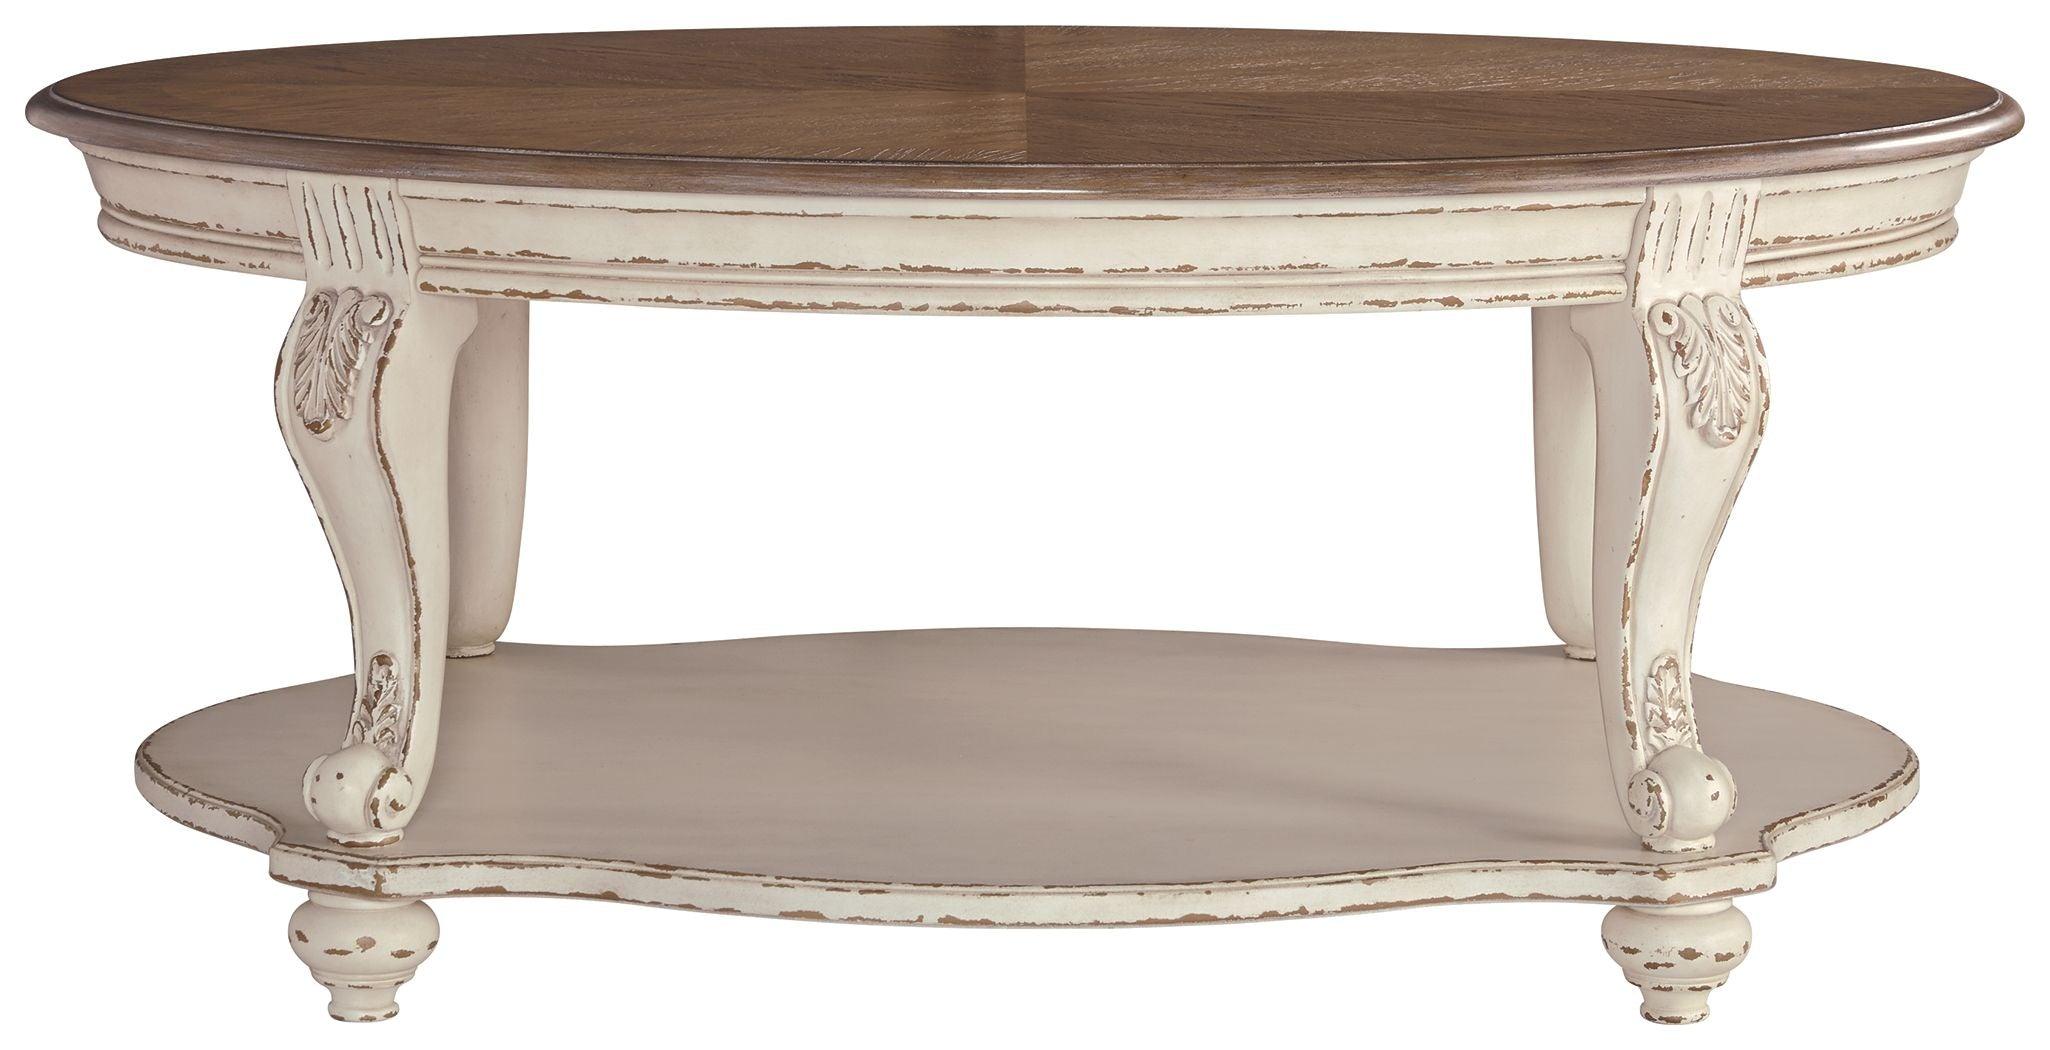 Ashley Furniture - Realyn - White / Brown - Oval Cocktail Table - 5th Avenue Furniture